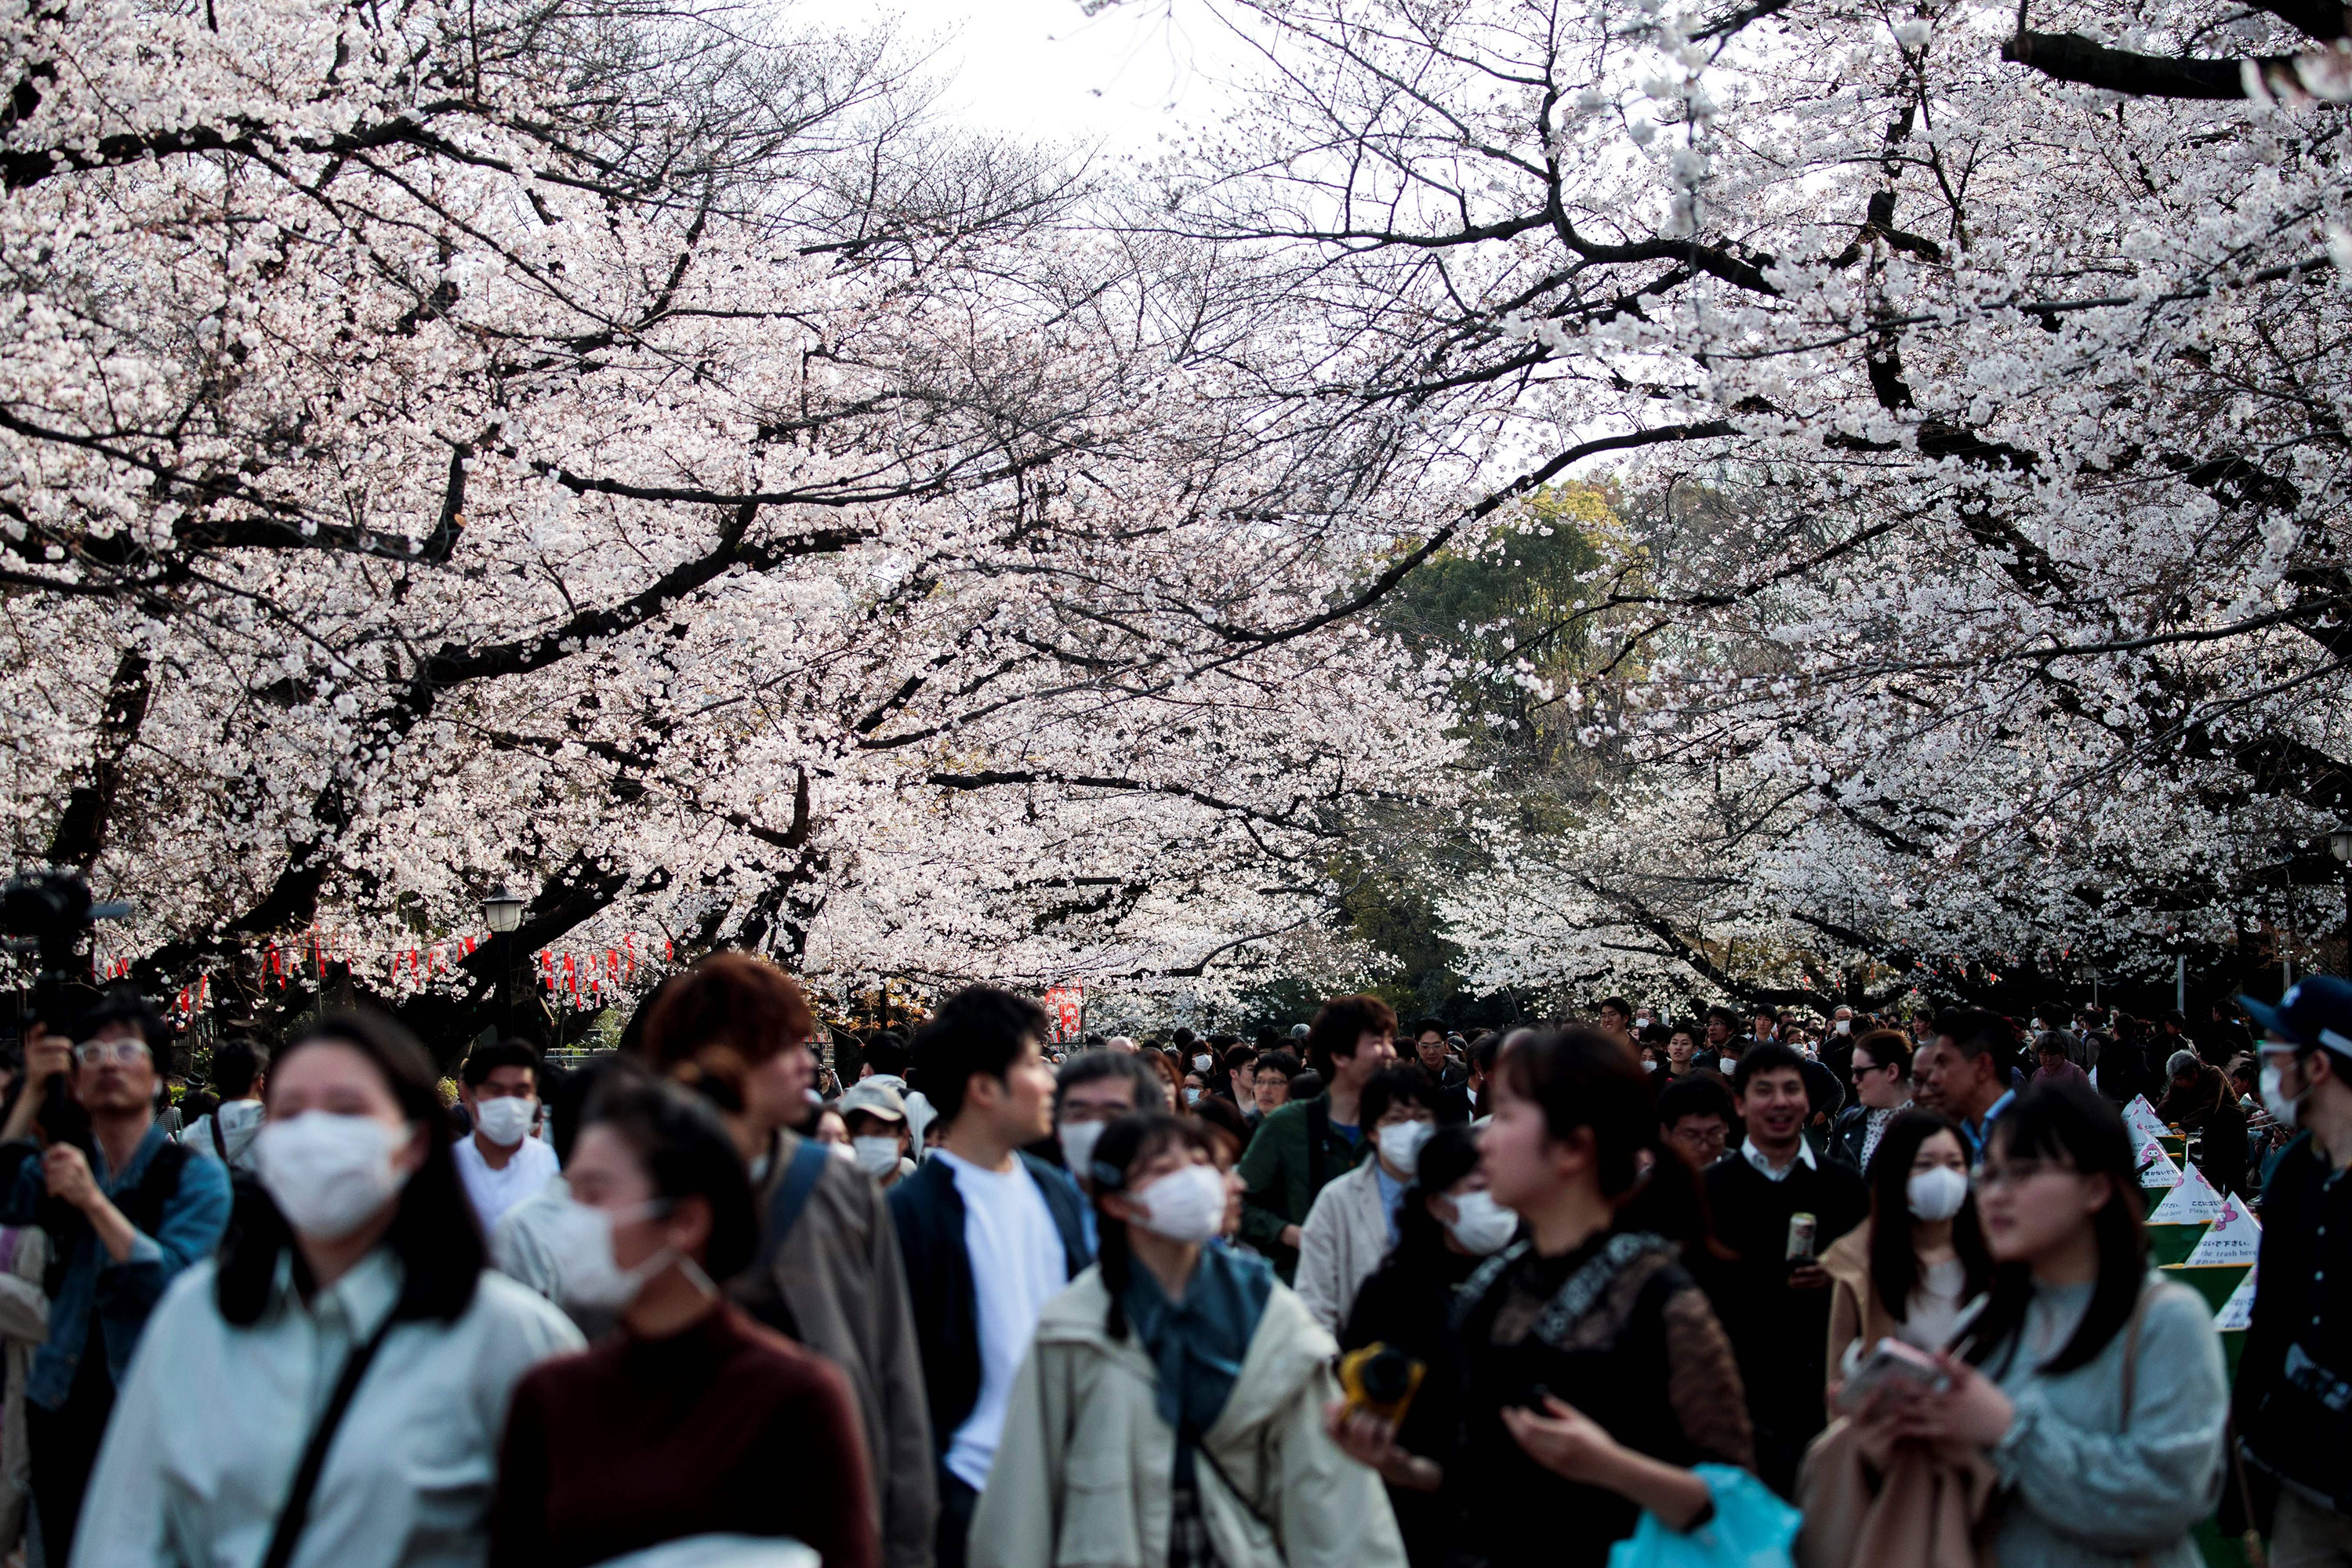 People walk under the cherry blossoms at Ueno park in Tokyo on March 22.